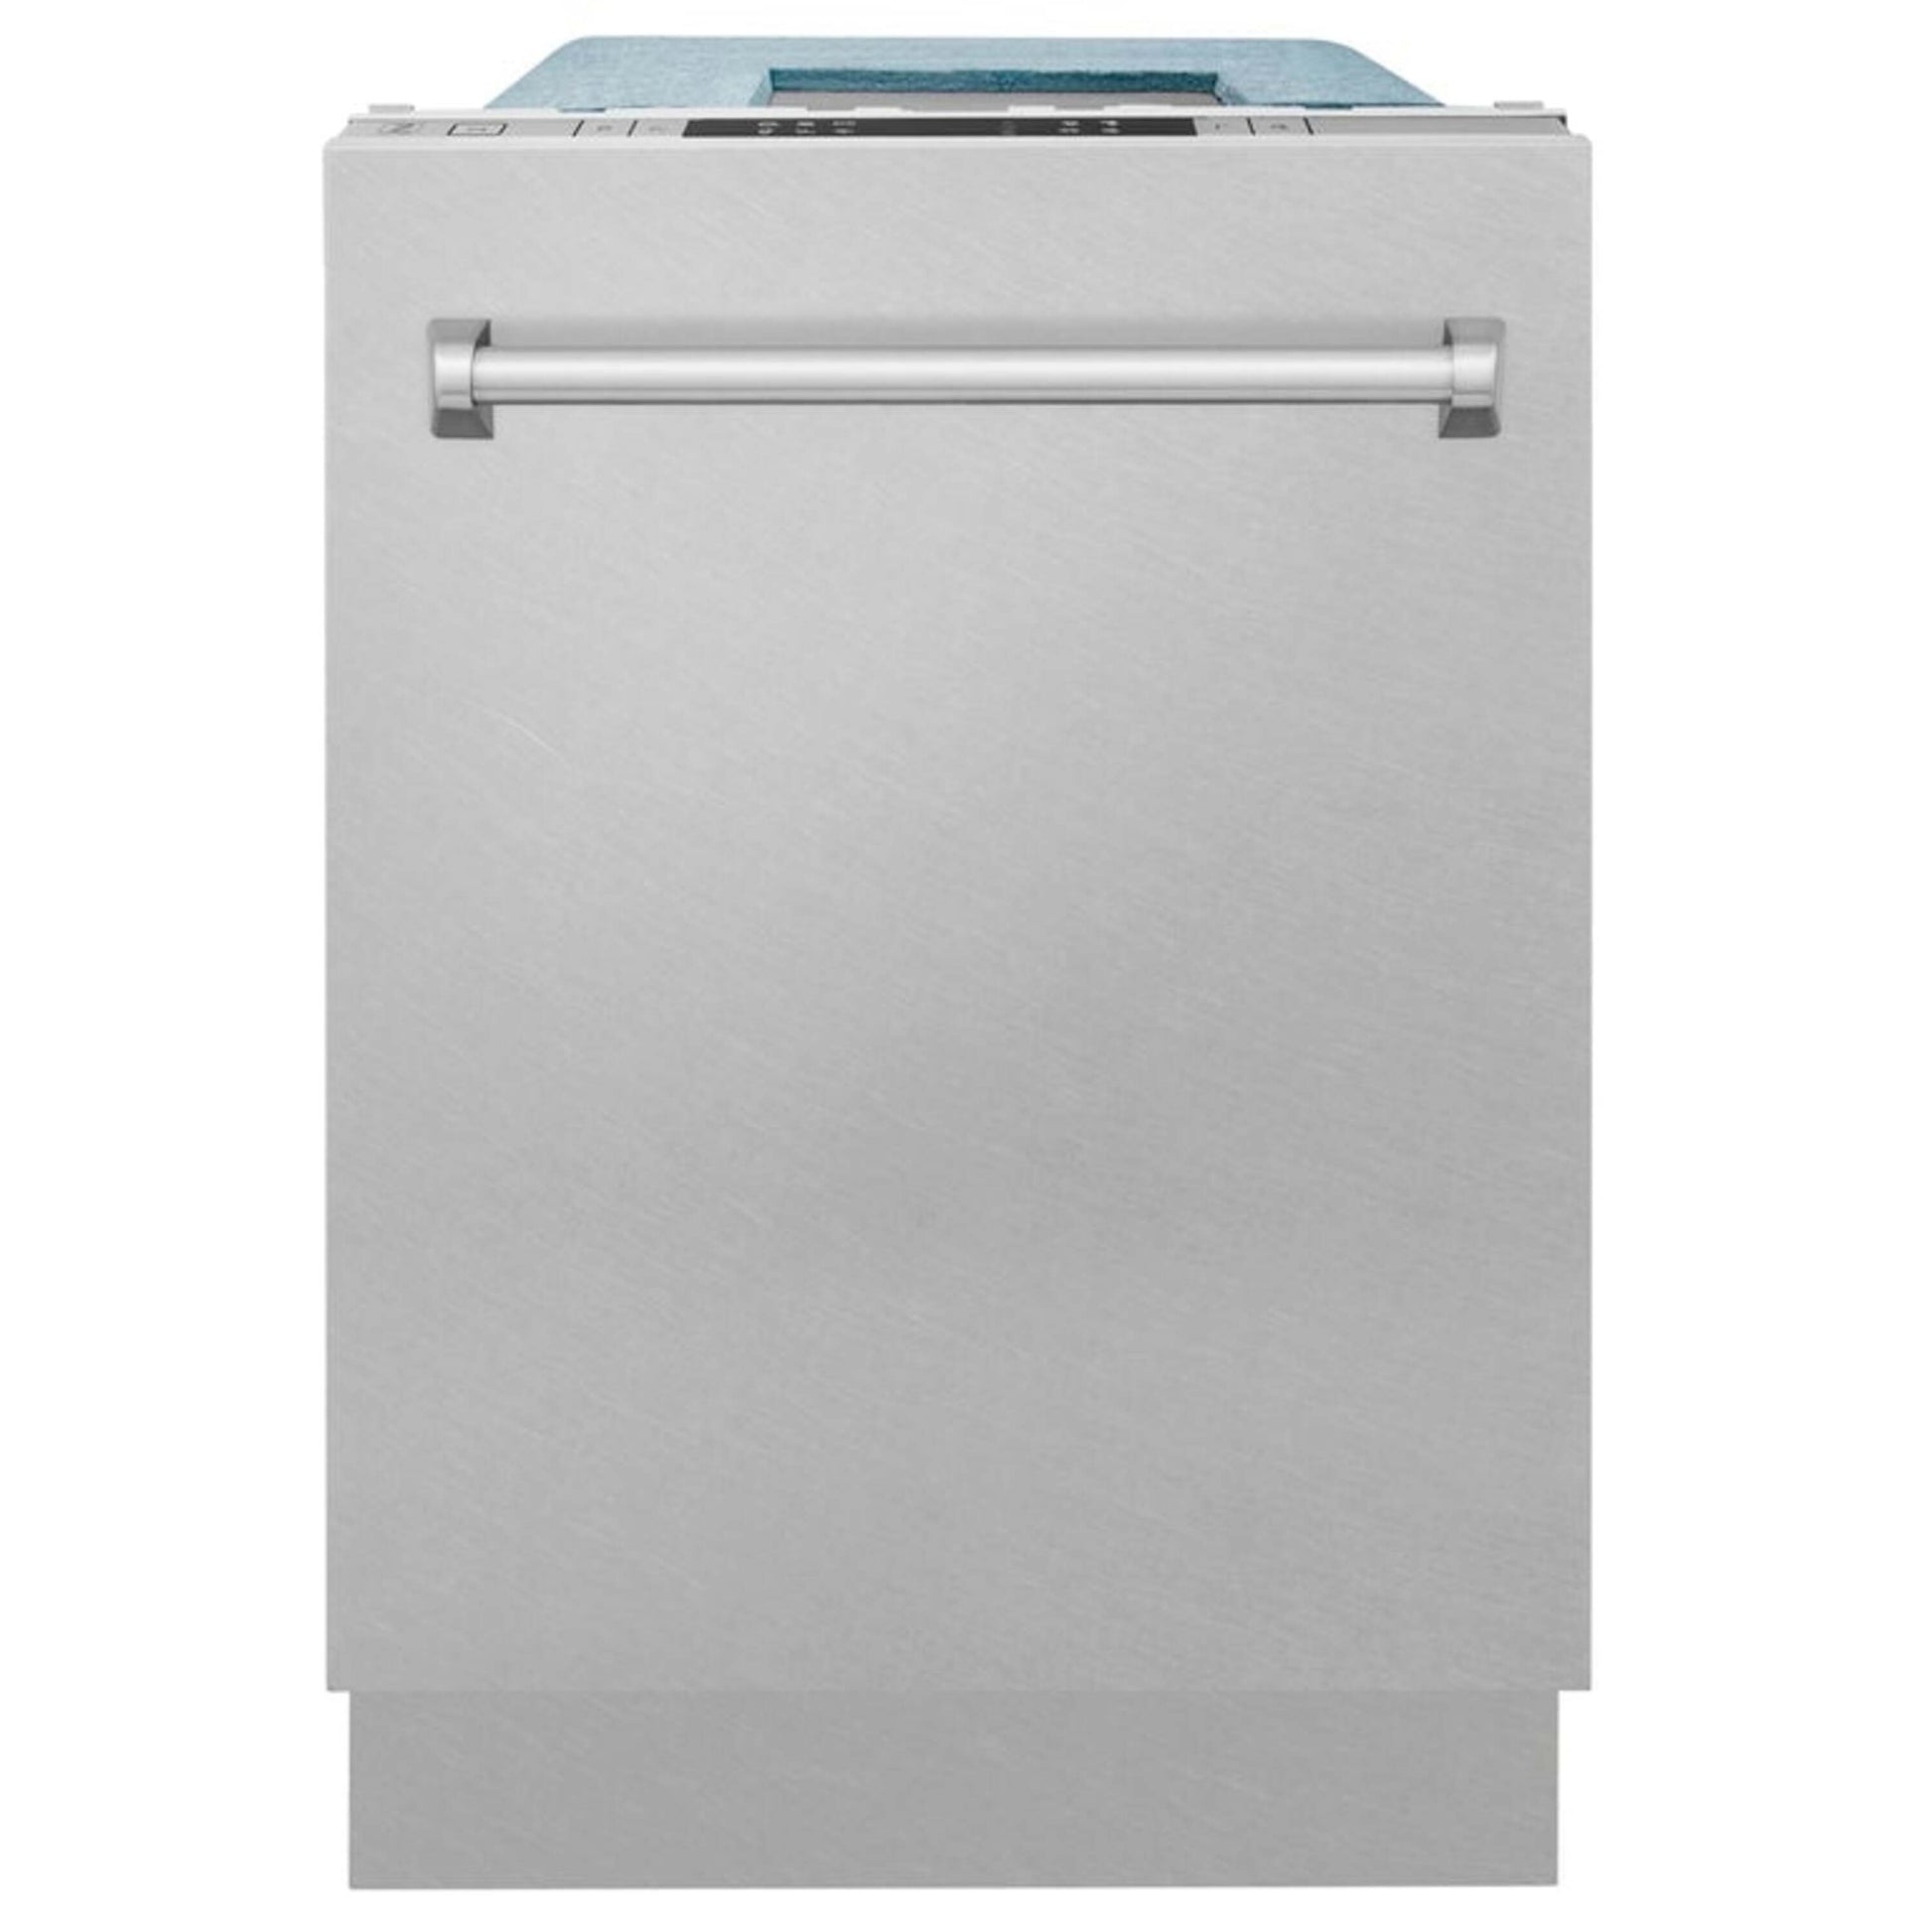 ZLINE 18" Compact Top Control Dishwasher - Fingerprint Resistant DuraSnow® Finished Stainless Steel Panel, Traditional Handle